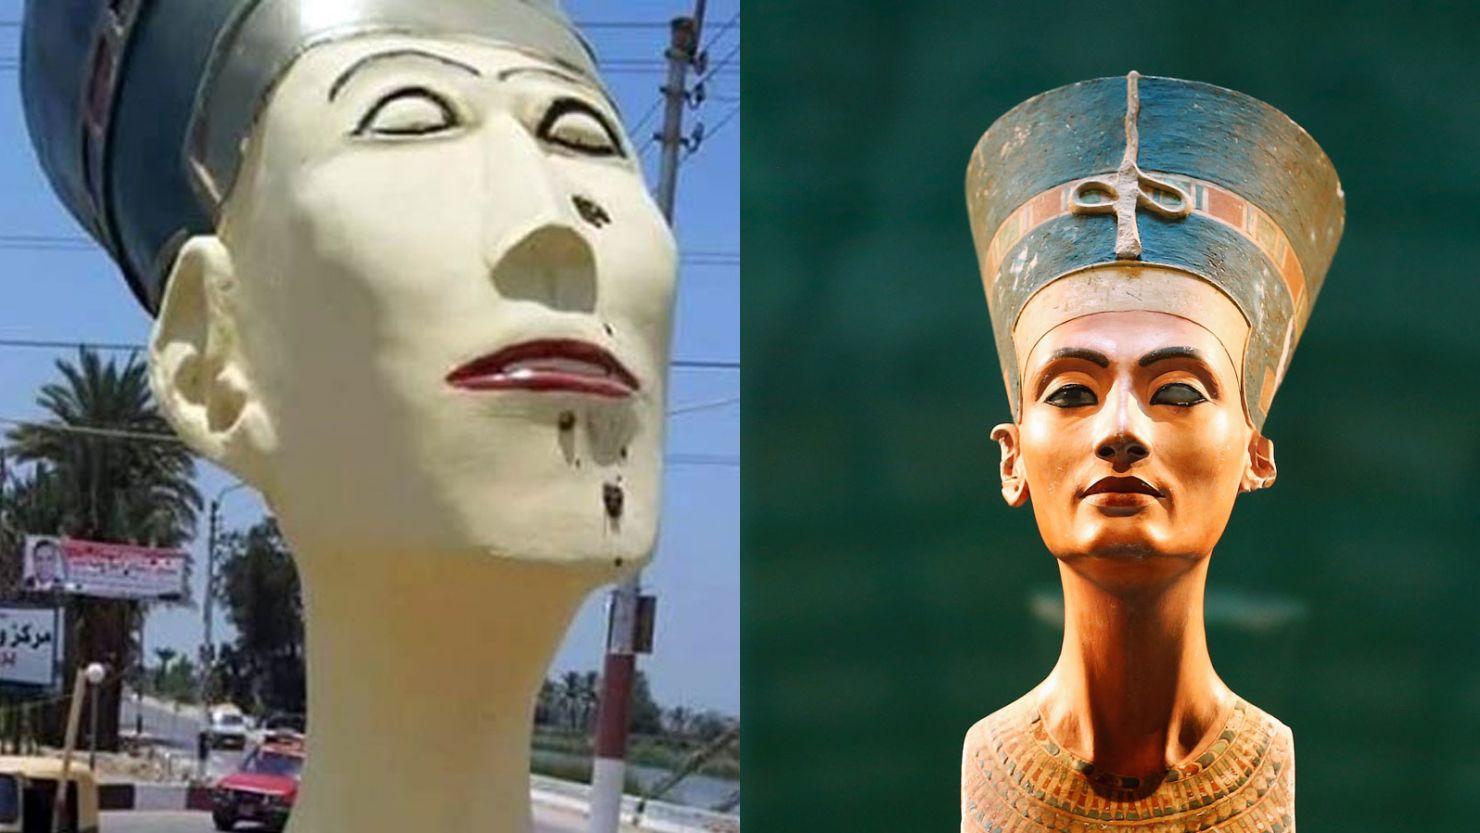 The statue of Nefertiti erected outside an Egyptian town is a far cry from the 3,400-year-old figurine on display in a Berlin museum.